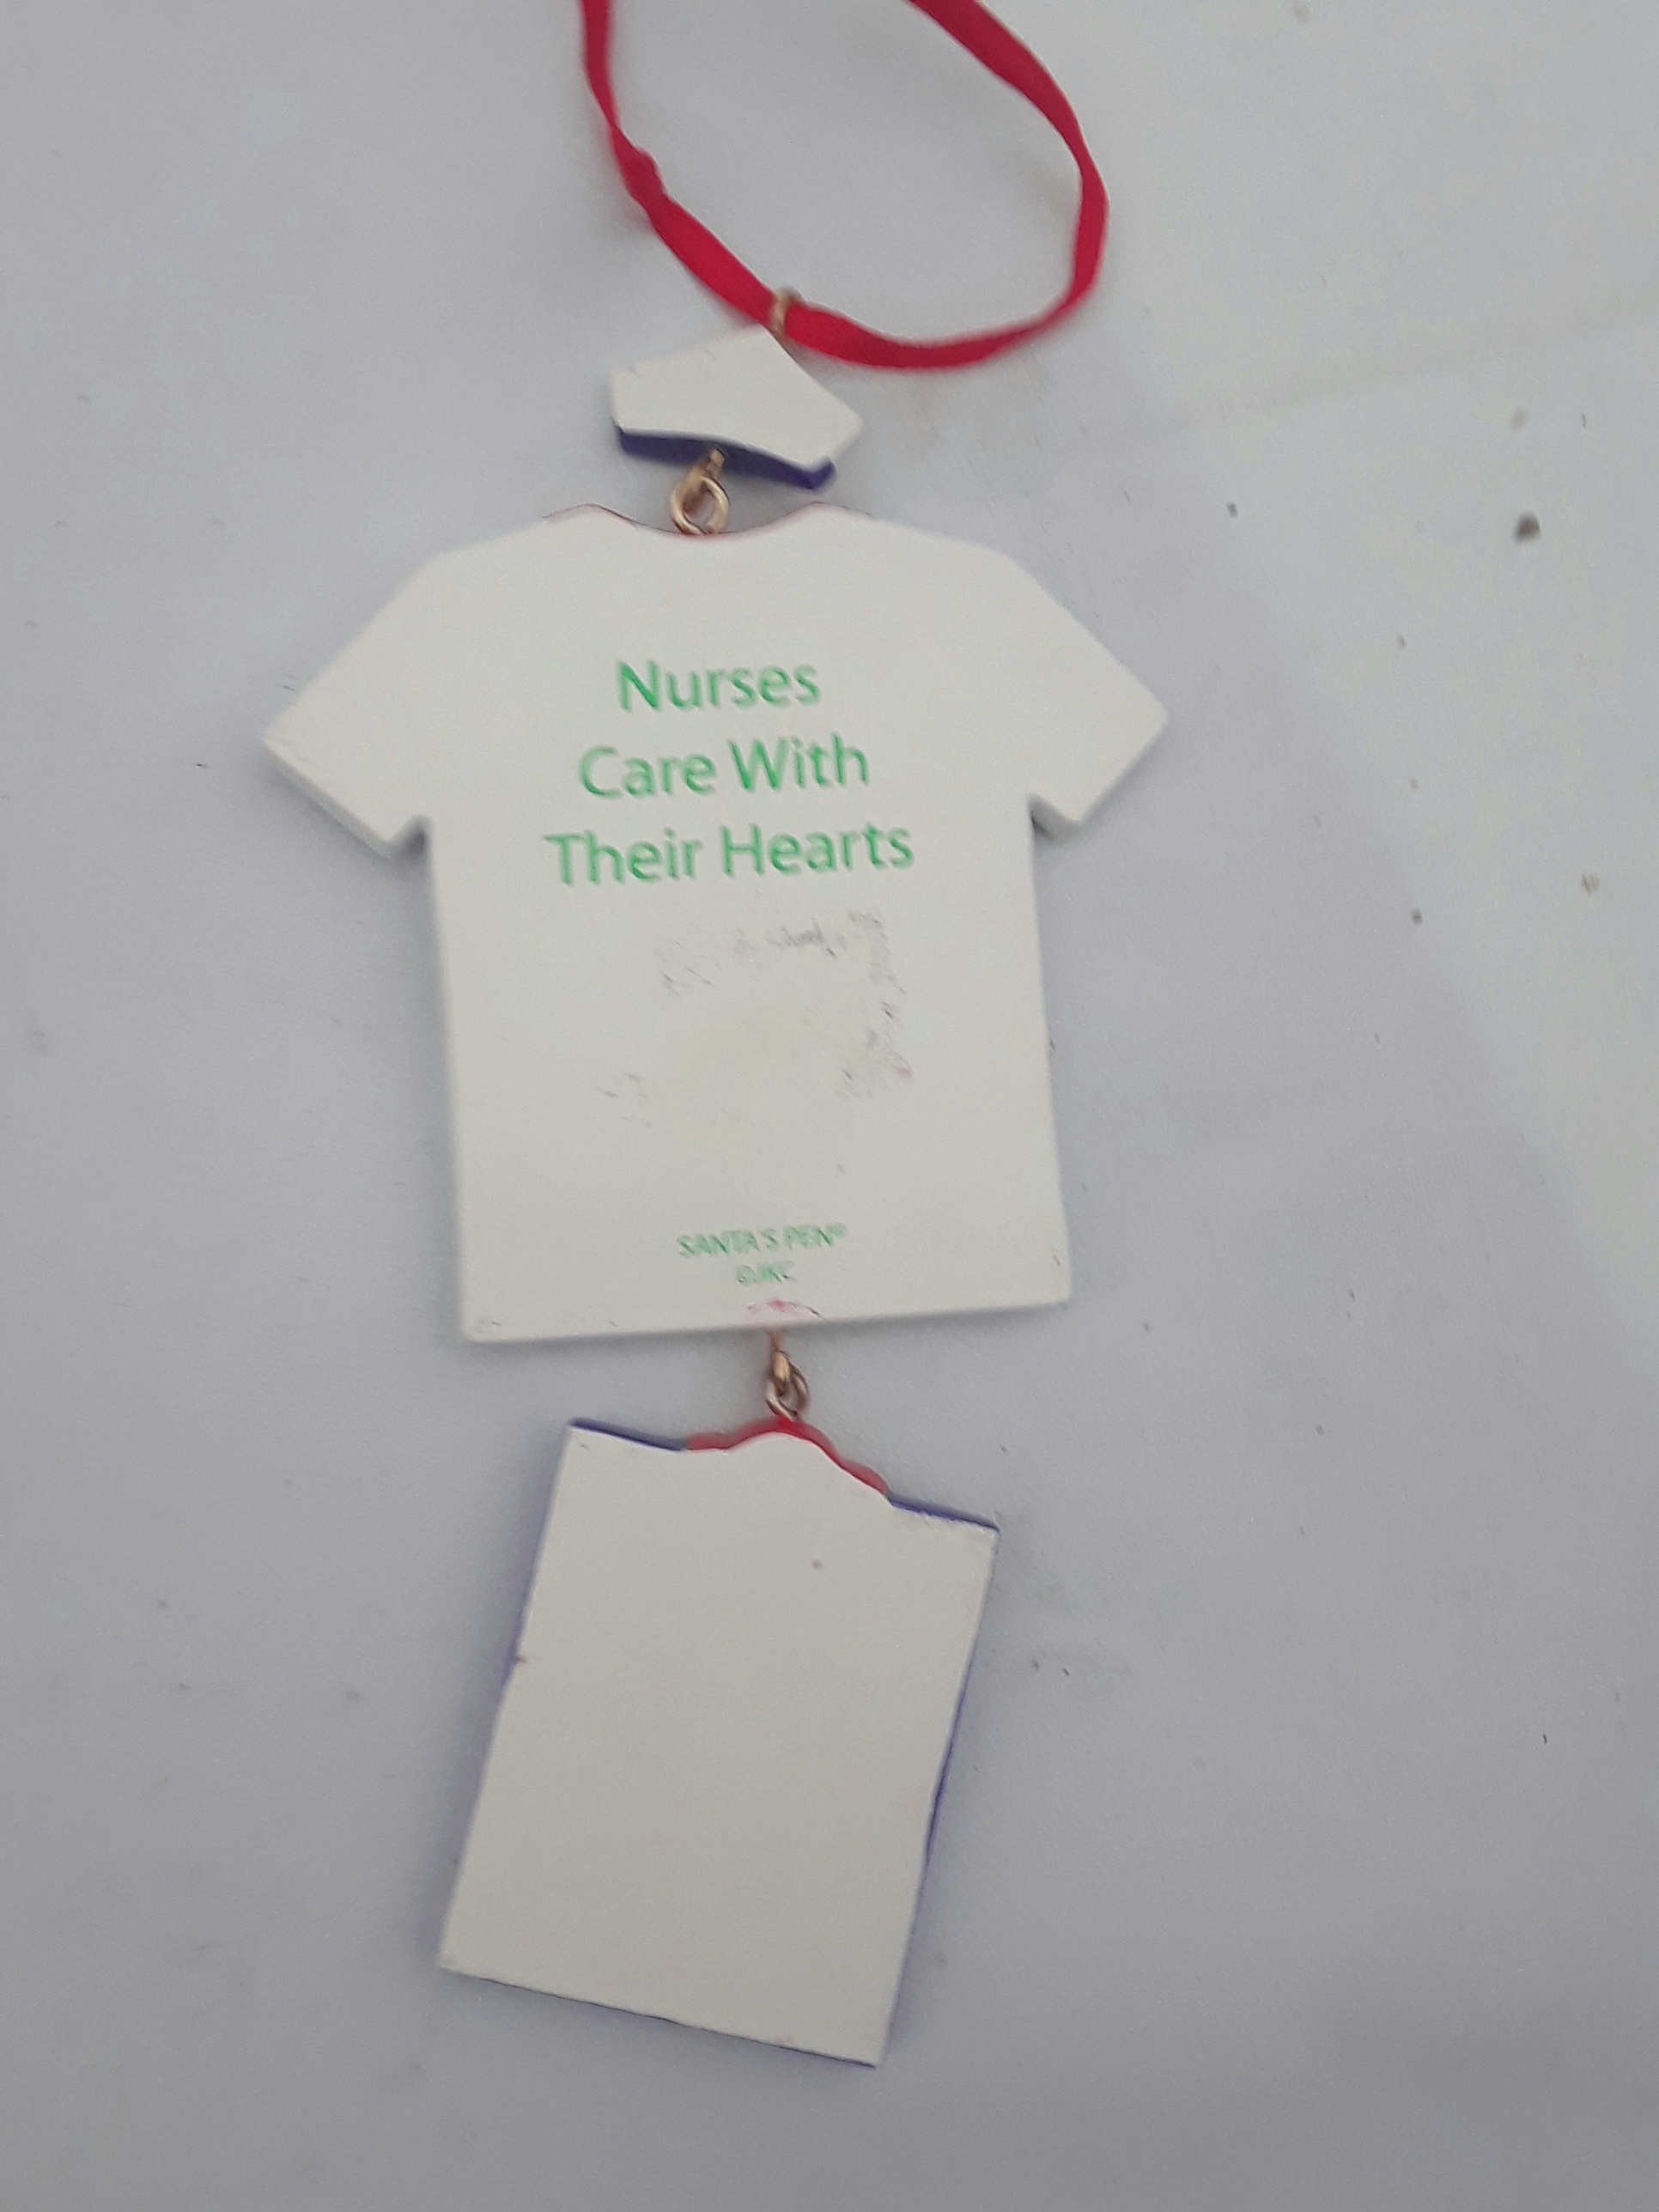 Nurses Care With Their Hearts Ornament by Santas Pen